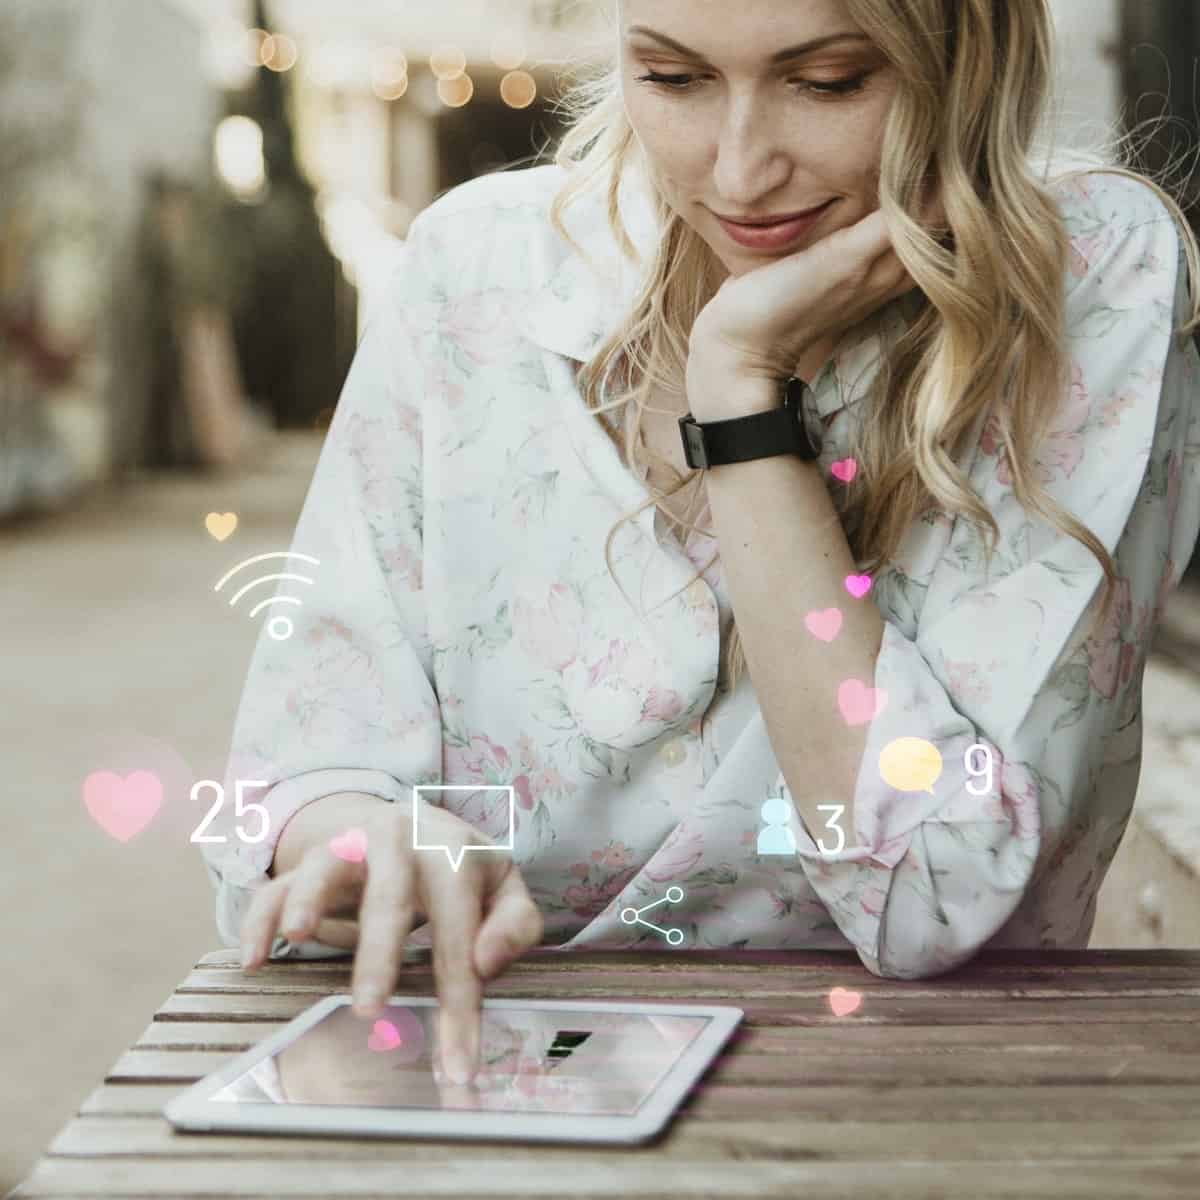 Blond woman sits at a wooden table outside and uses her tablet. She has one hand under her chin and the other hand on the tablet screen.